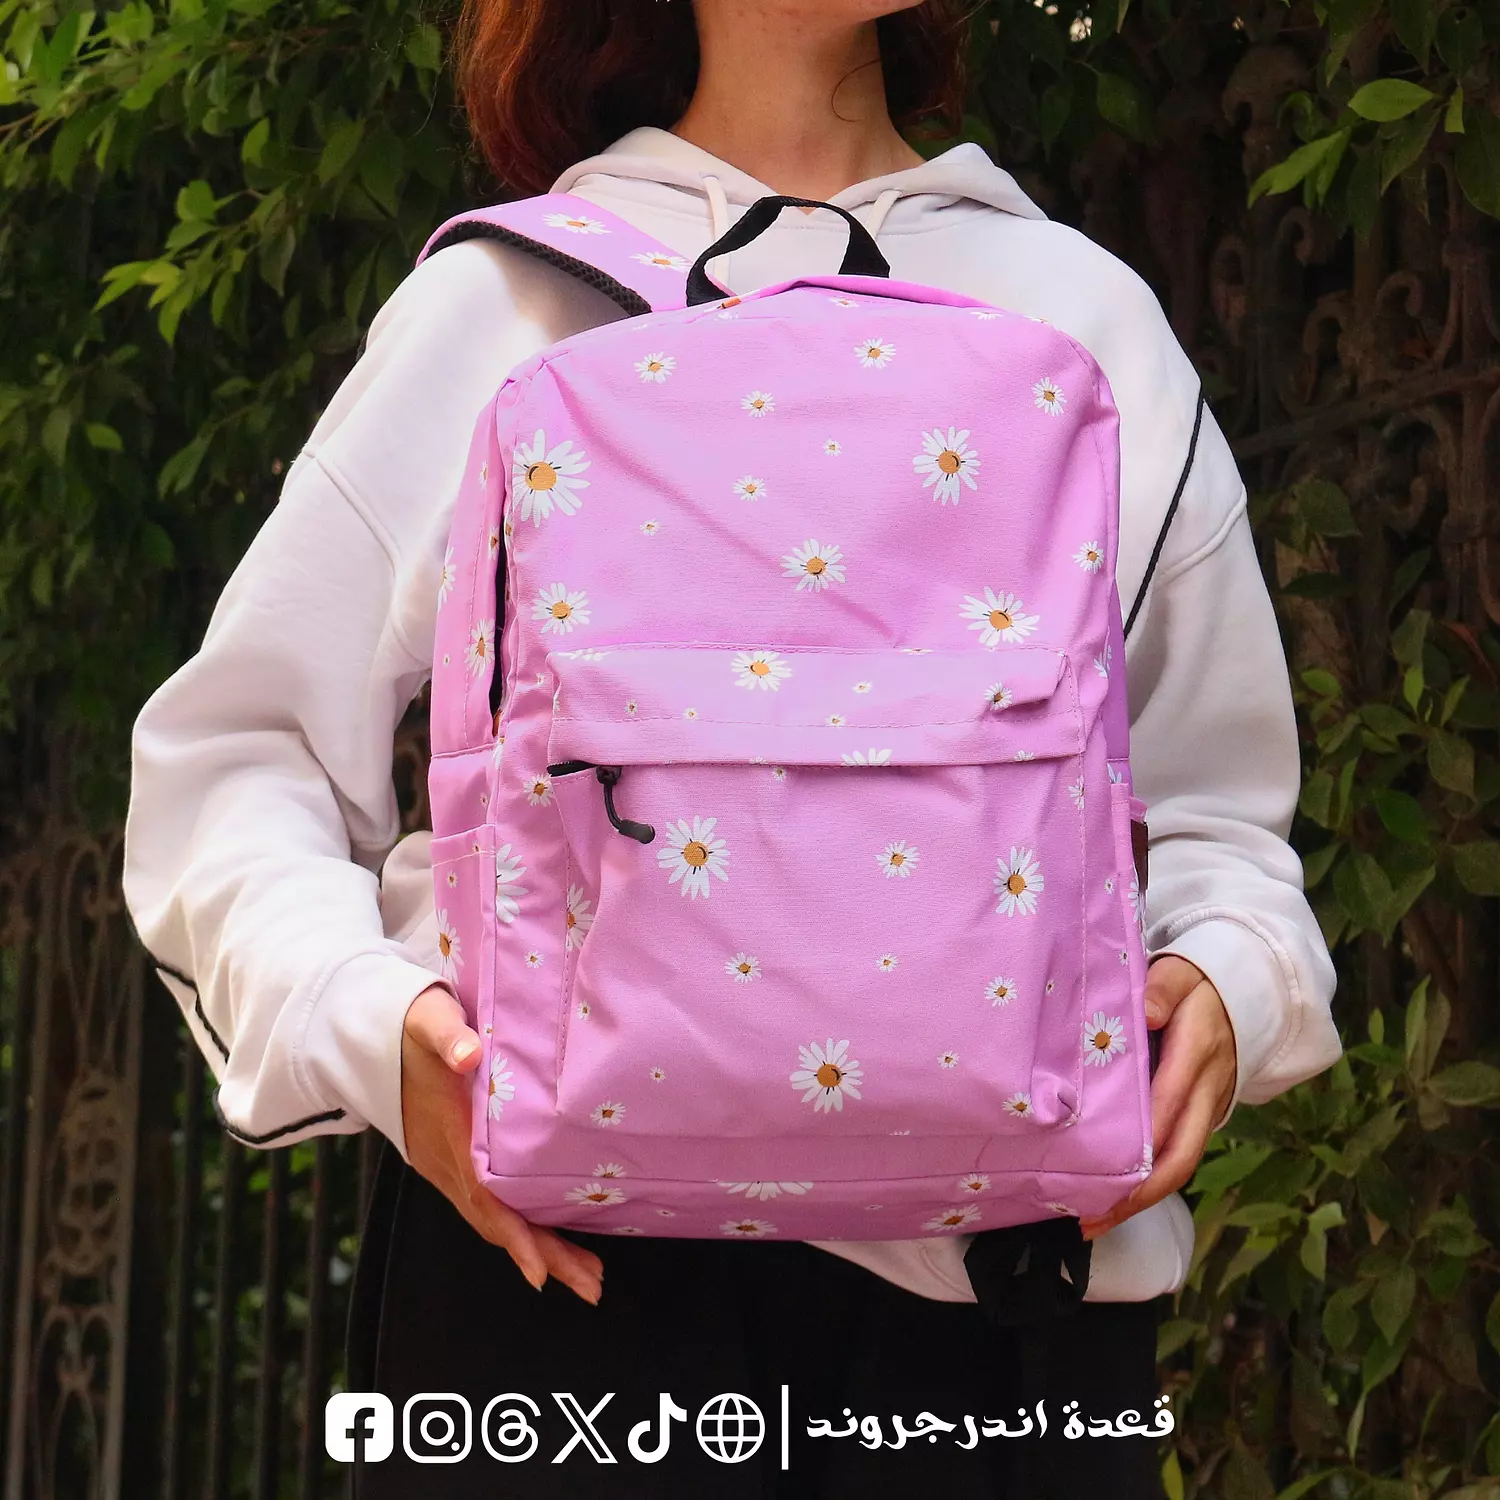 Pink Daisy 🌸 Backpack 🎒 hover image